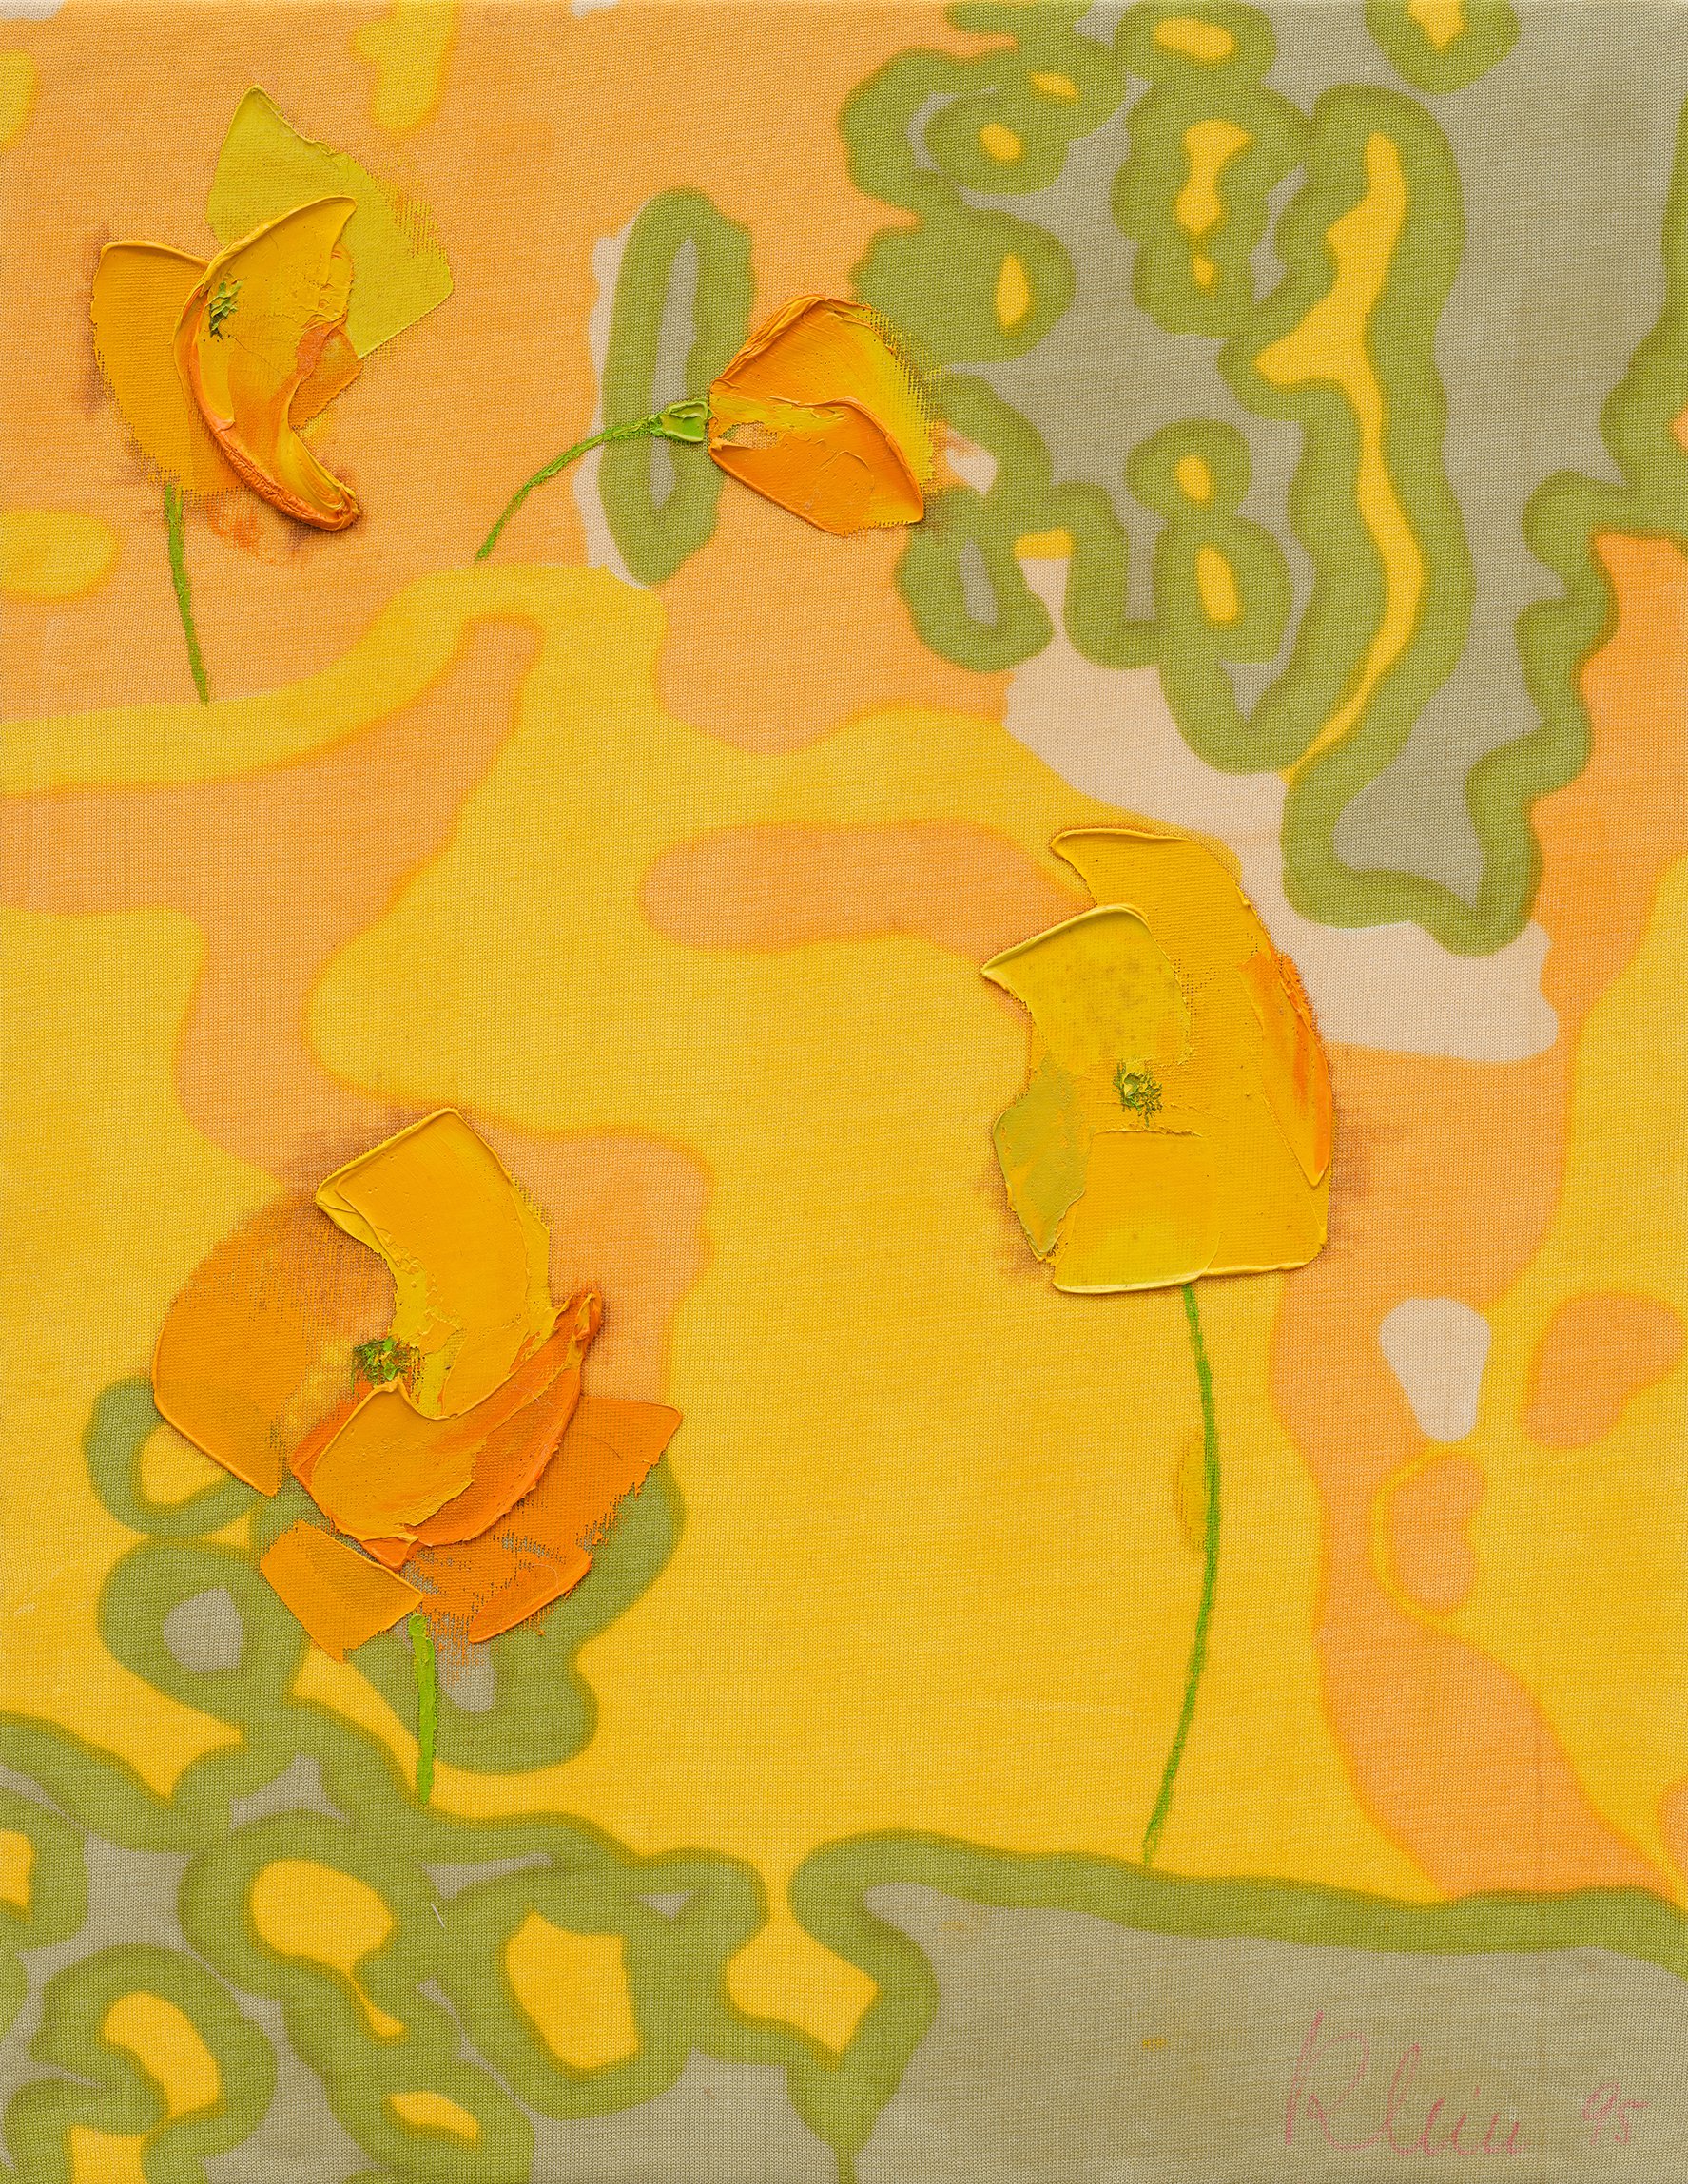 Bernat Klein, Yellow Poppies, oil on screen printed knitted jersey polyester (Diolen), 47 x 36 cm, 1995